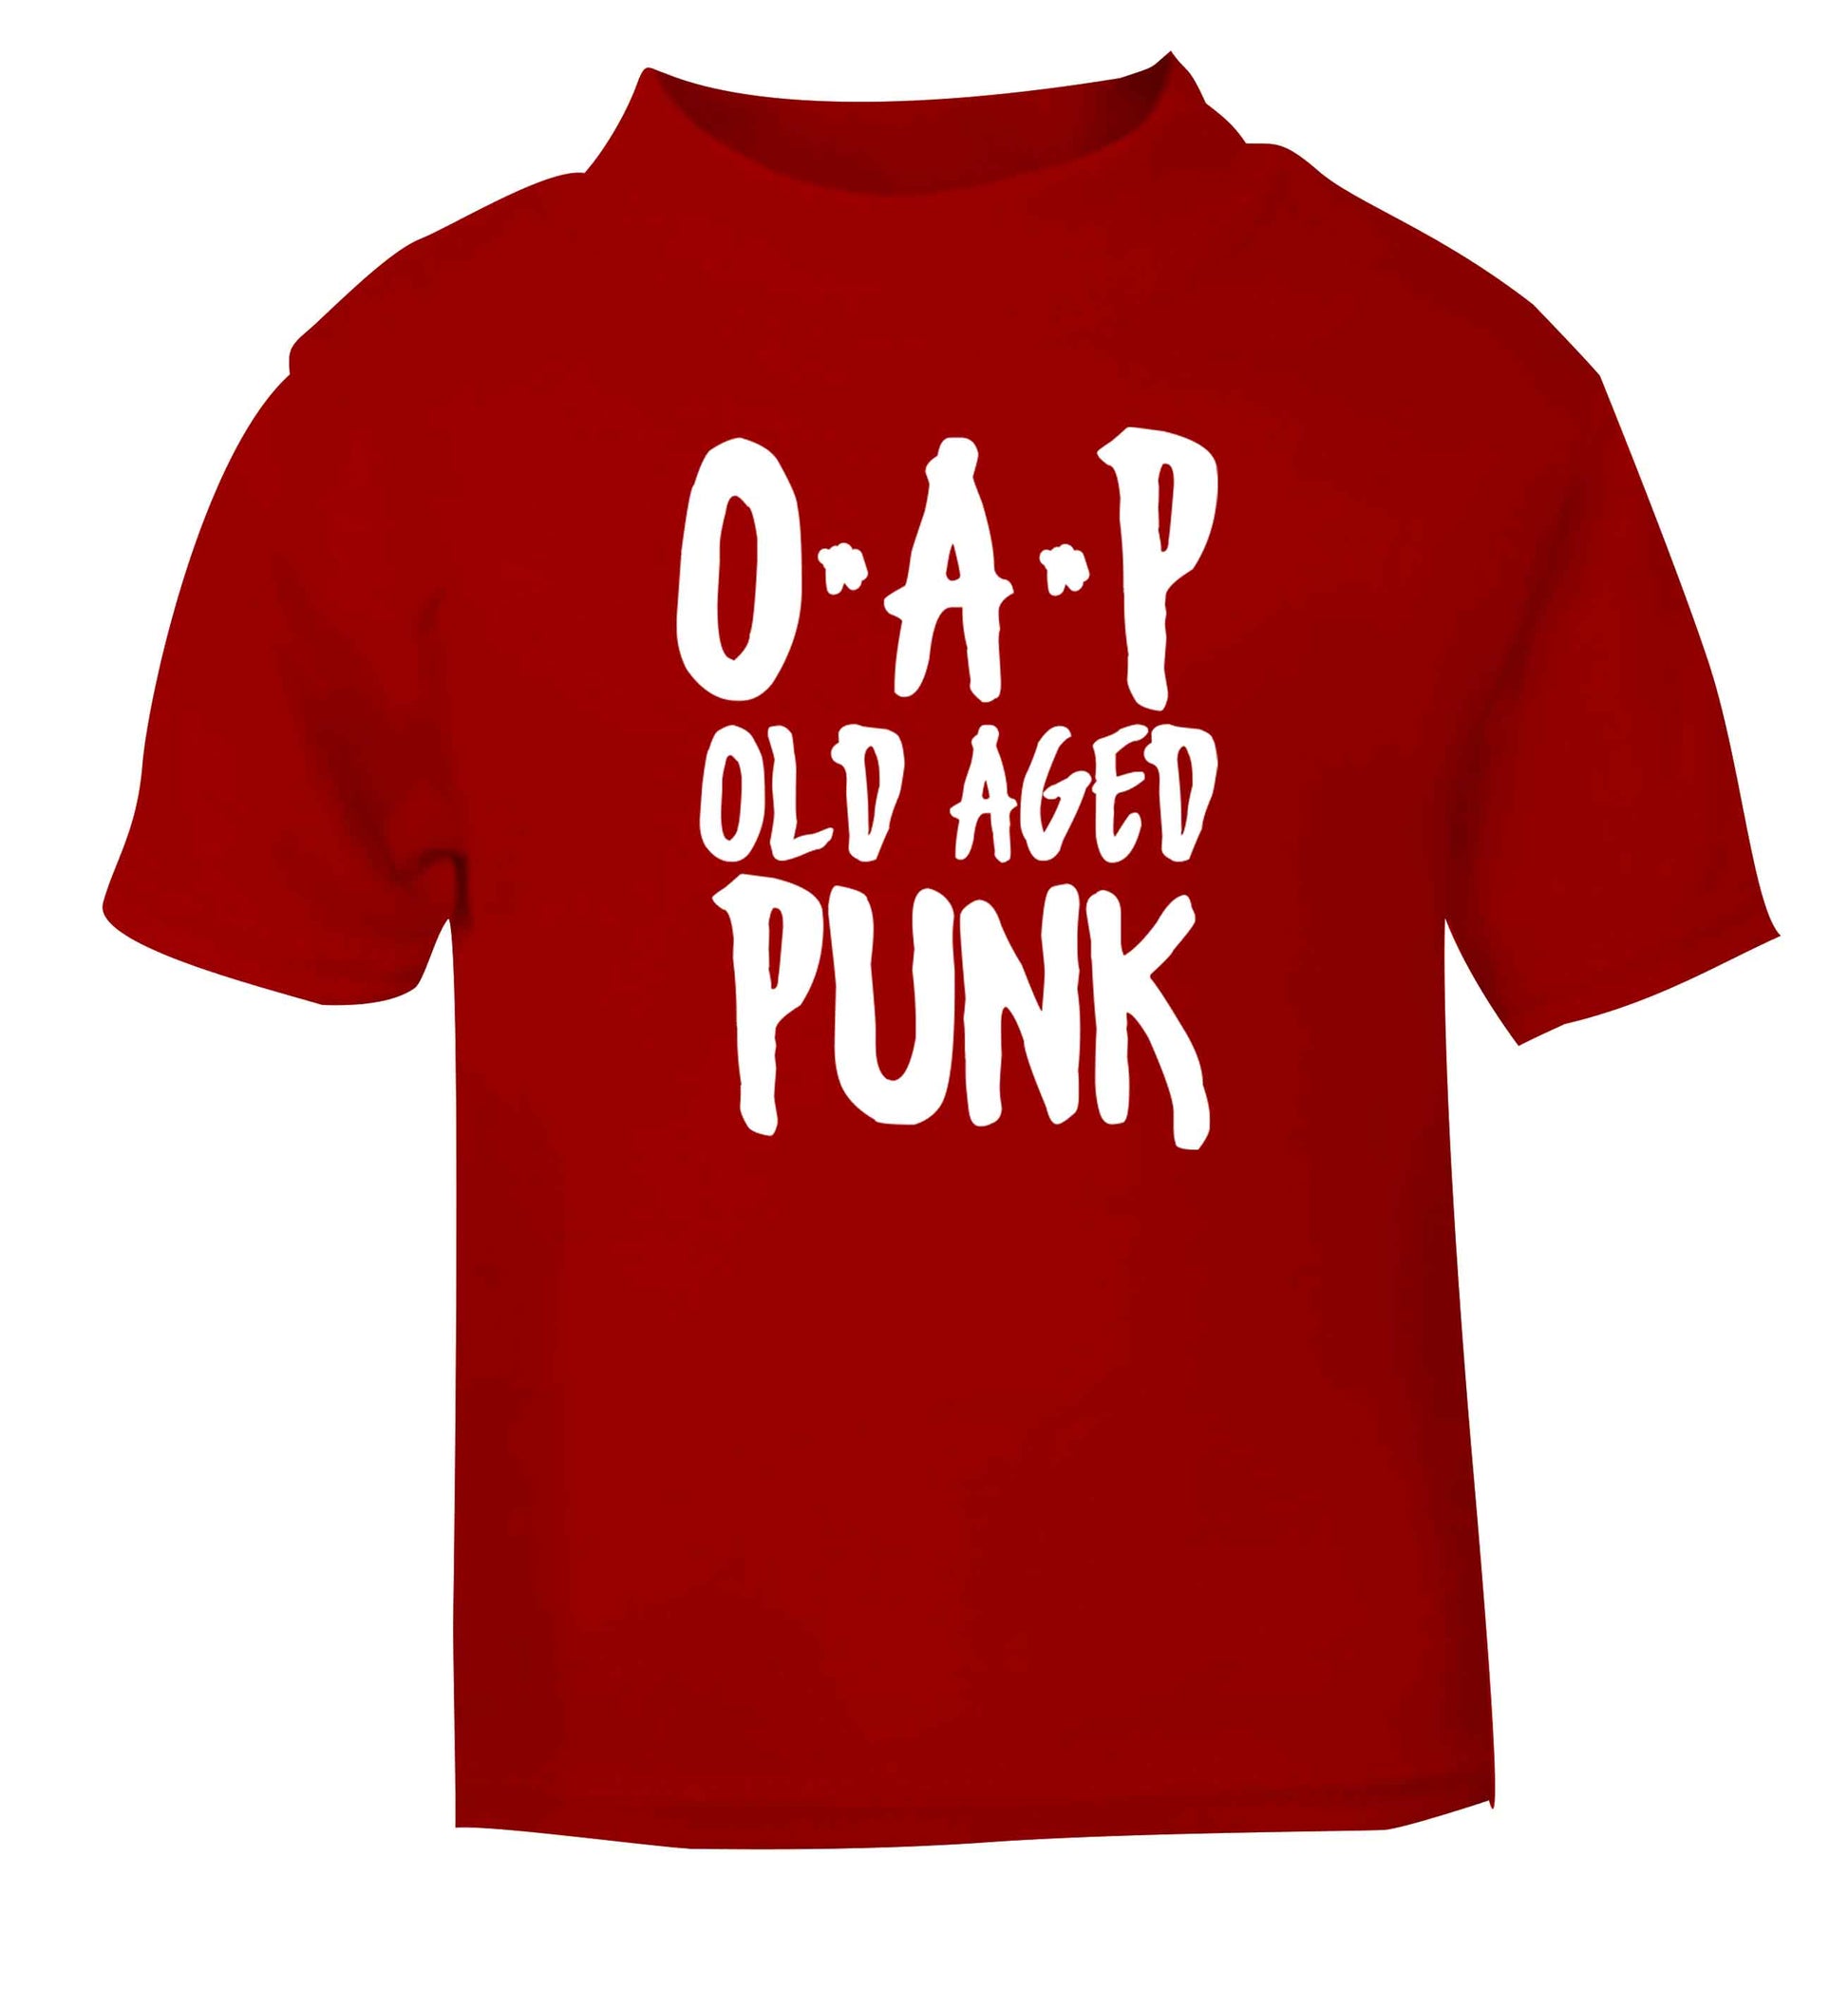 O.A.P Old Age Punk red Baby Toddler Tshirt 2 Years